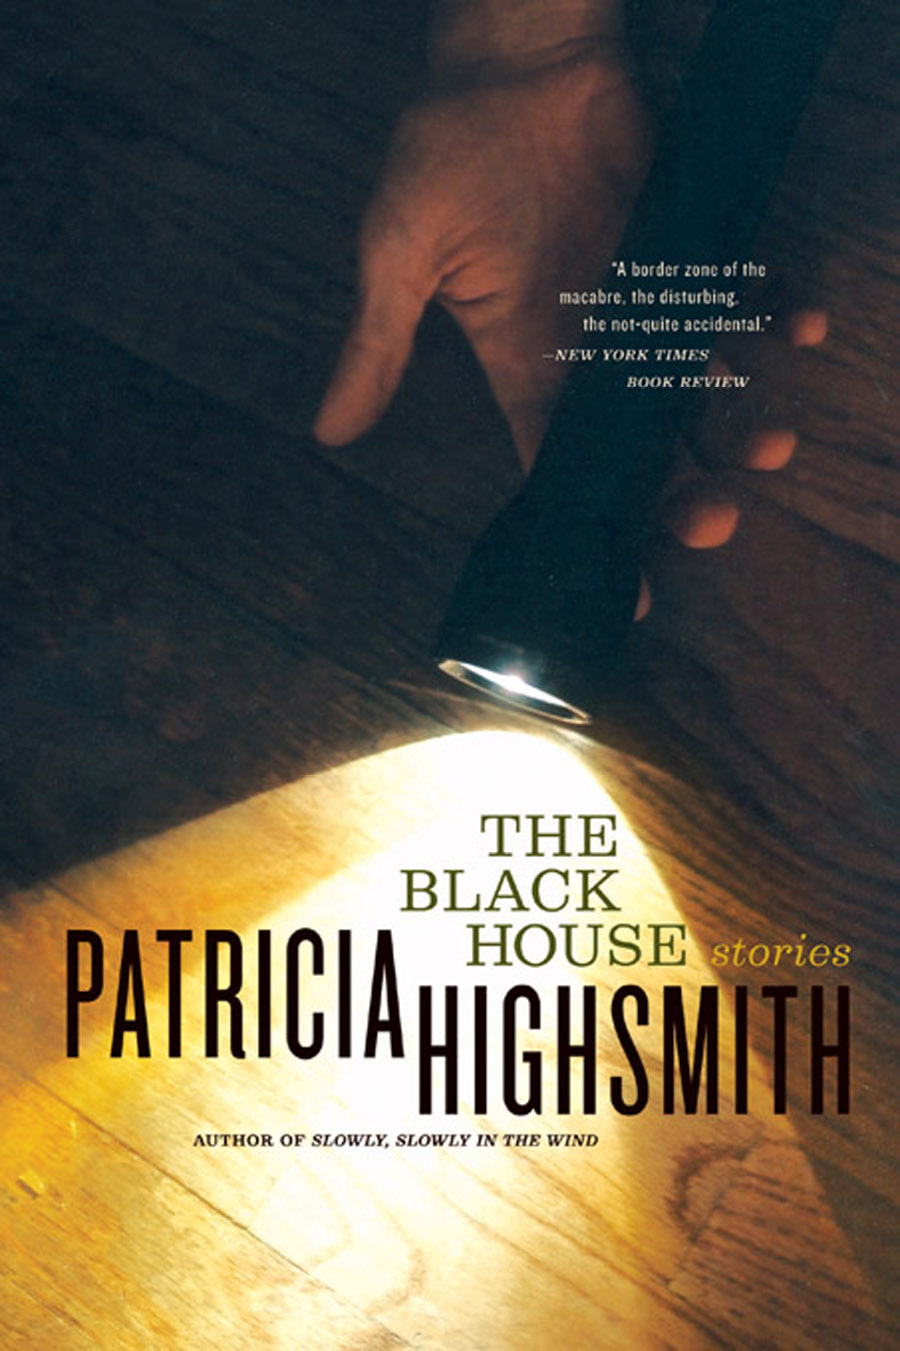 The Black House (2012) by Patricia Highsmith